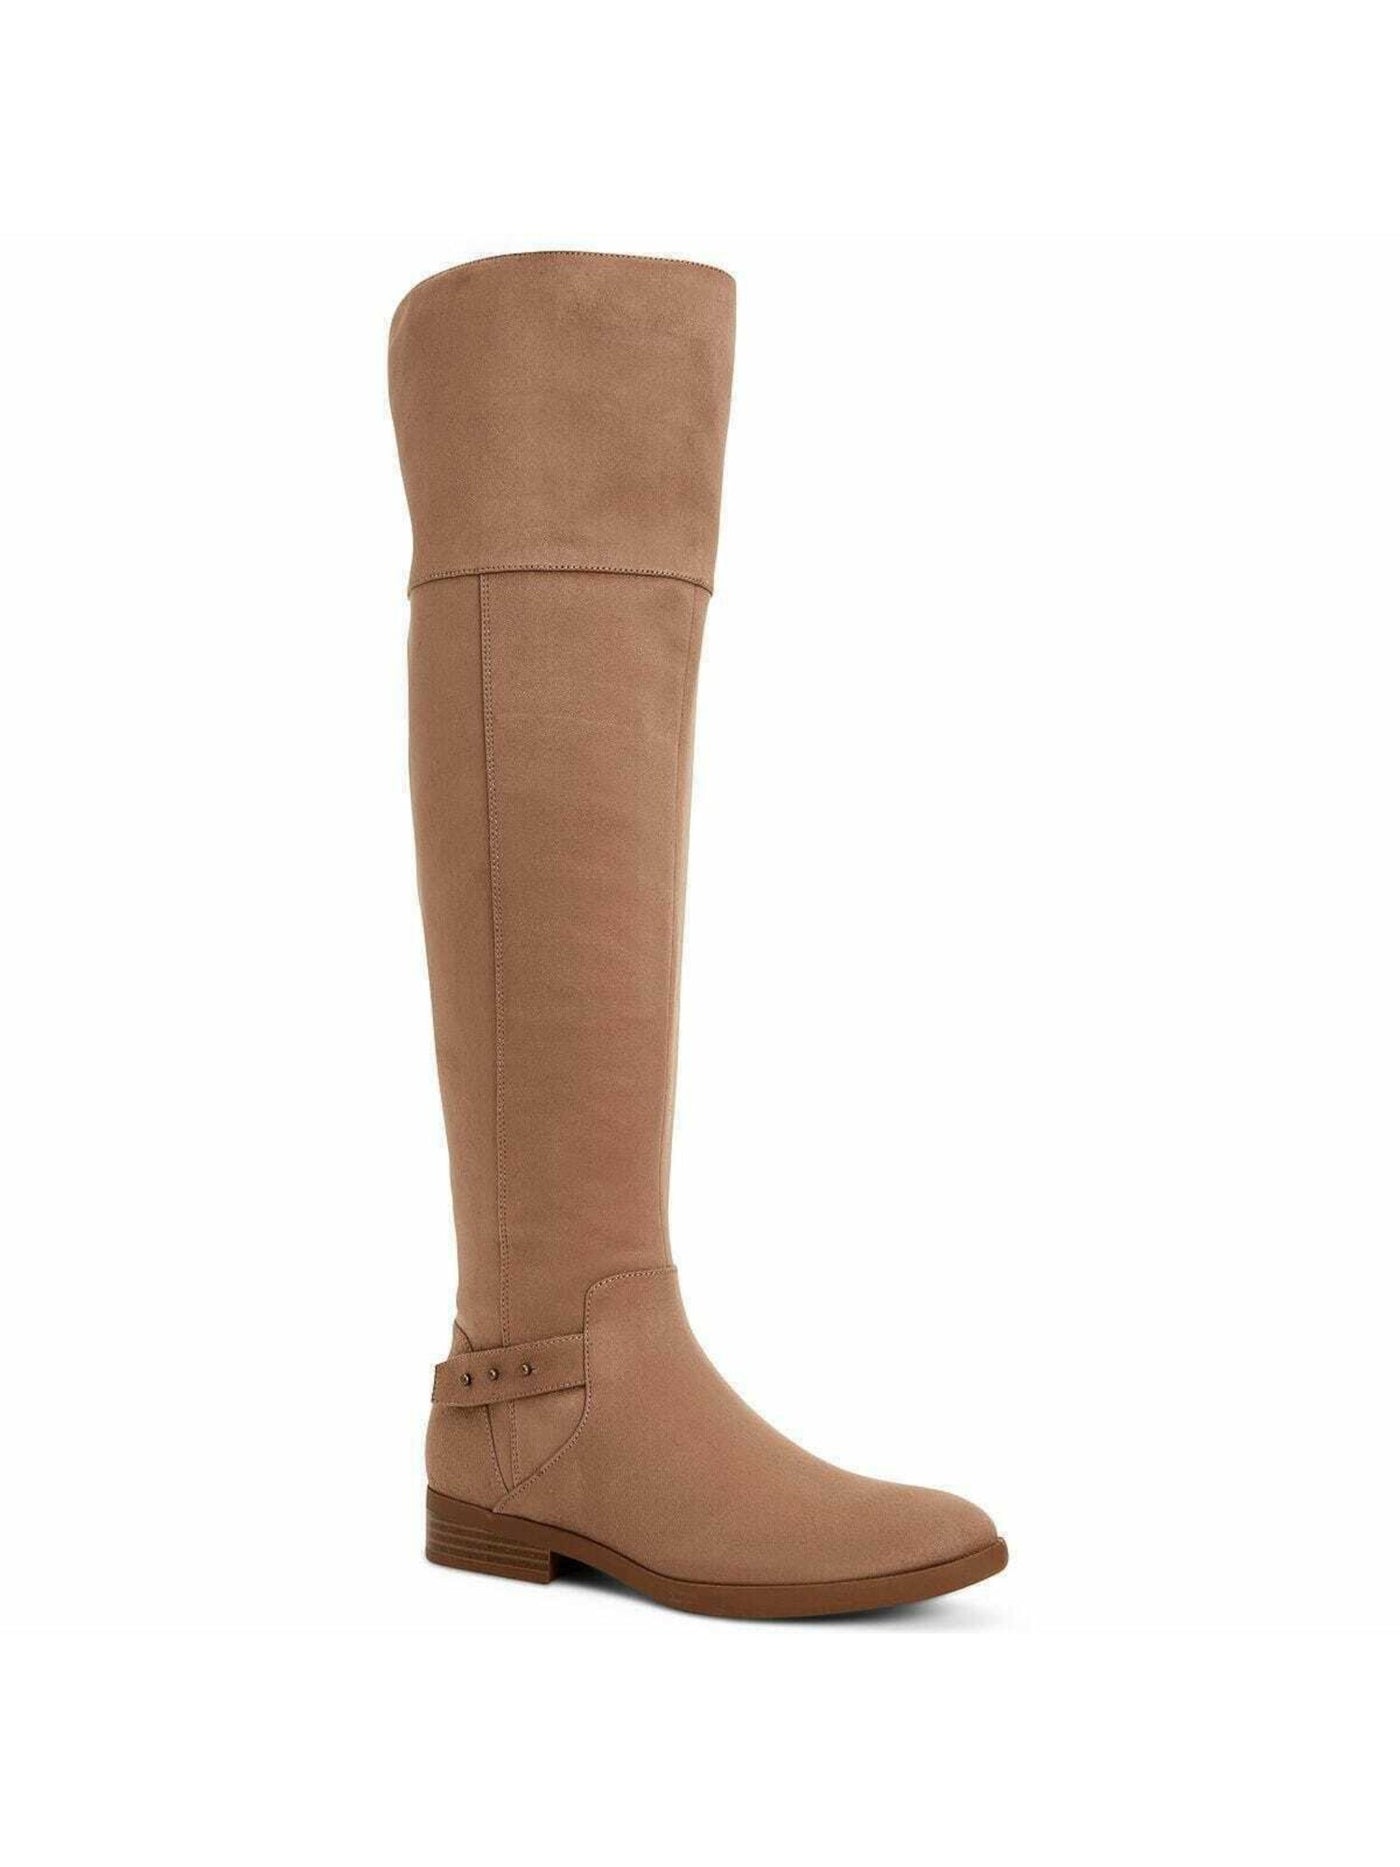 STYLE & COMPANY Womens Beige Round Toe Stacked Heel Zip-Up Dress Boots Shoes 7